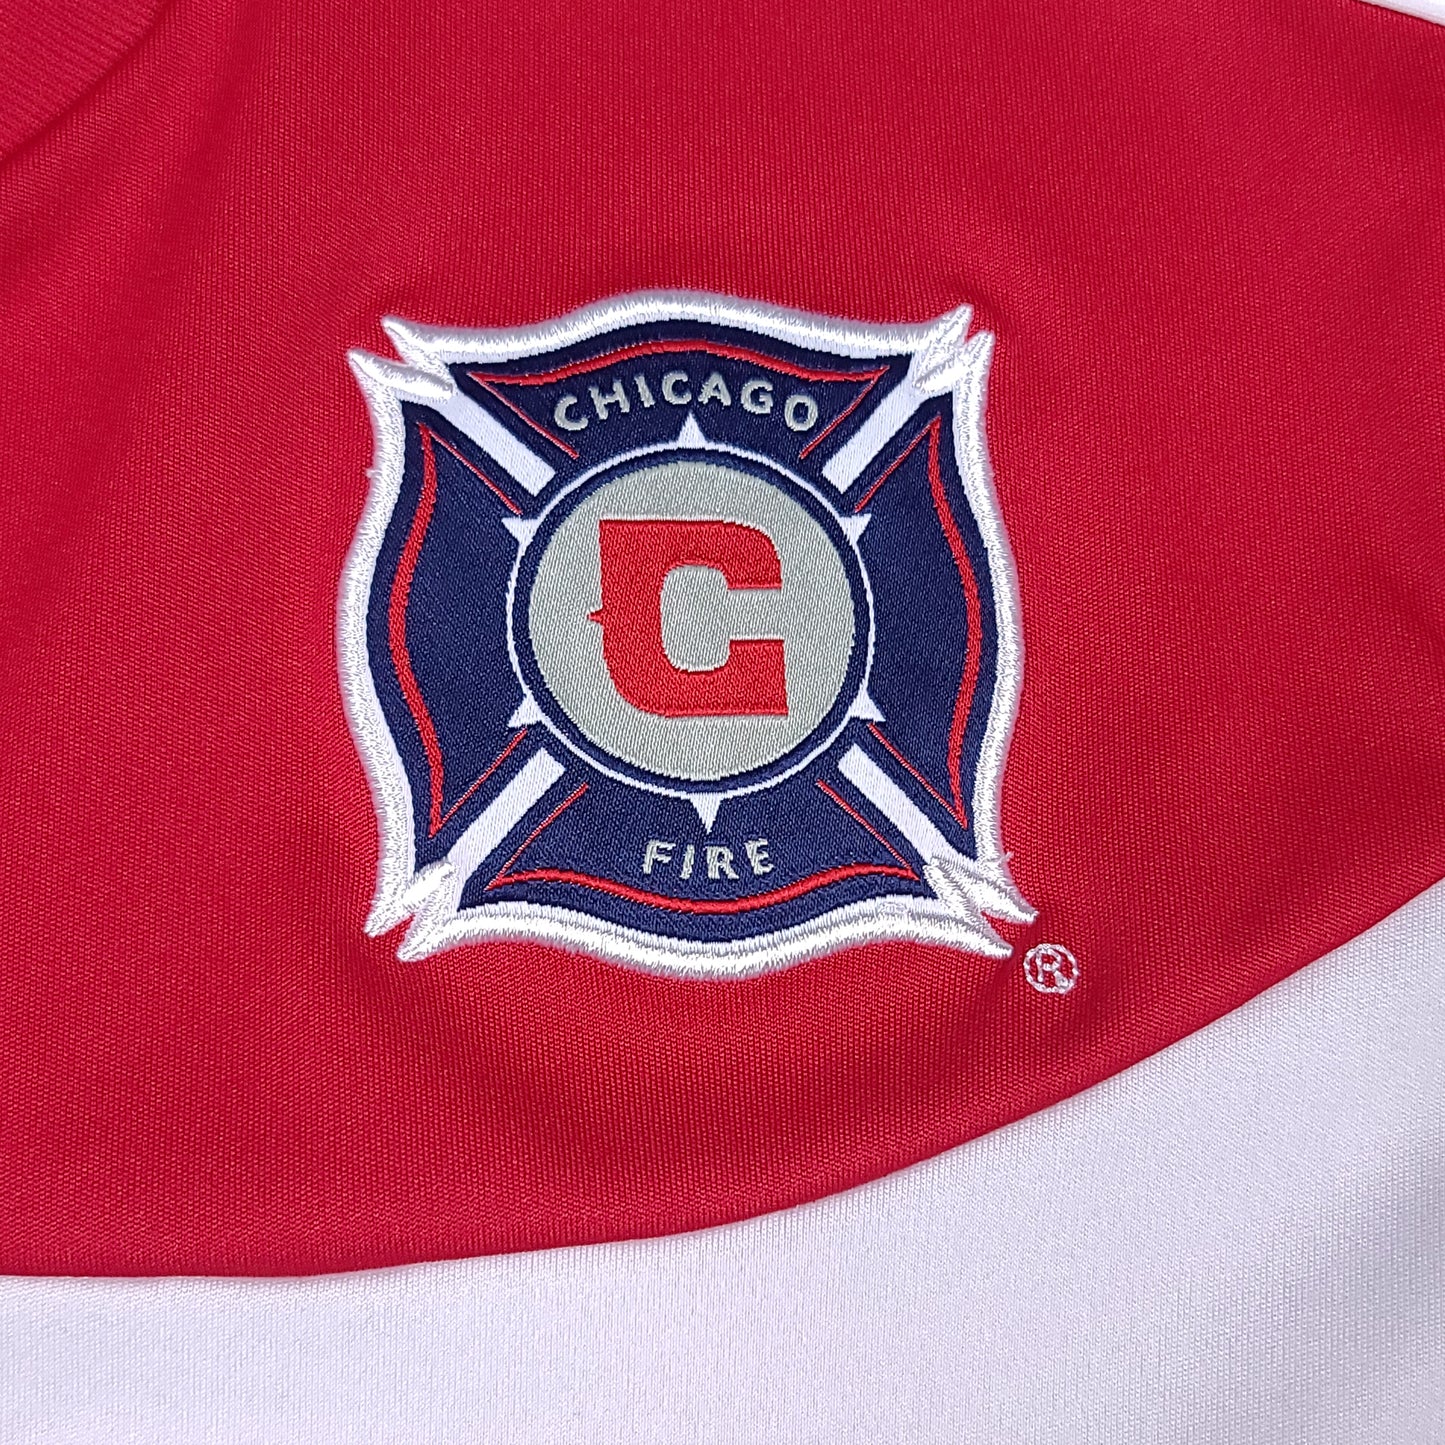 Chicago Fire Red 2010-11 adidas Home Youth Soccer Jersey